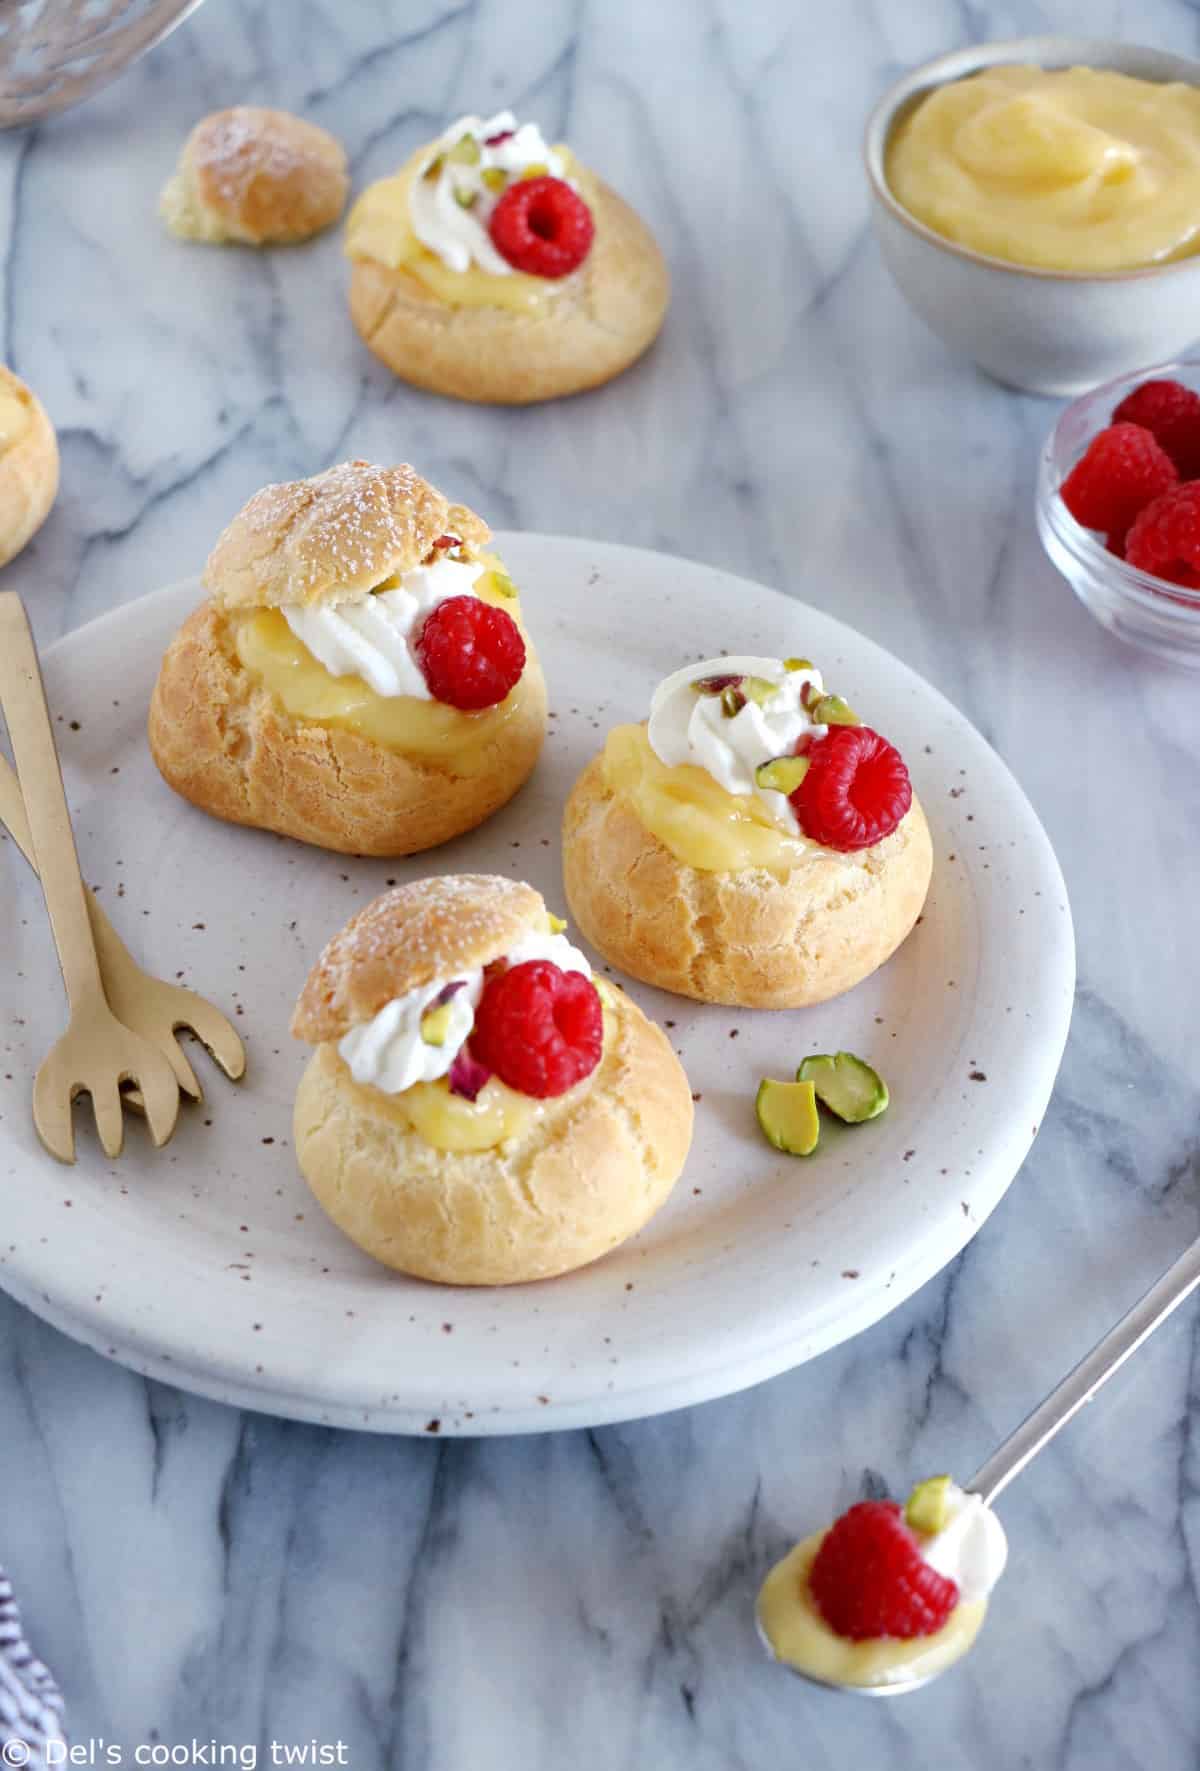 Easy raspberry and lemon curd cream puffs make a delicious fancy sweet dessert with a lovely touch of acidity brought by the homemade lemon curd and the fresh raspberries.